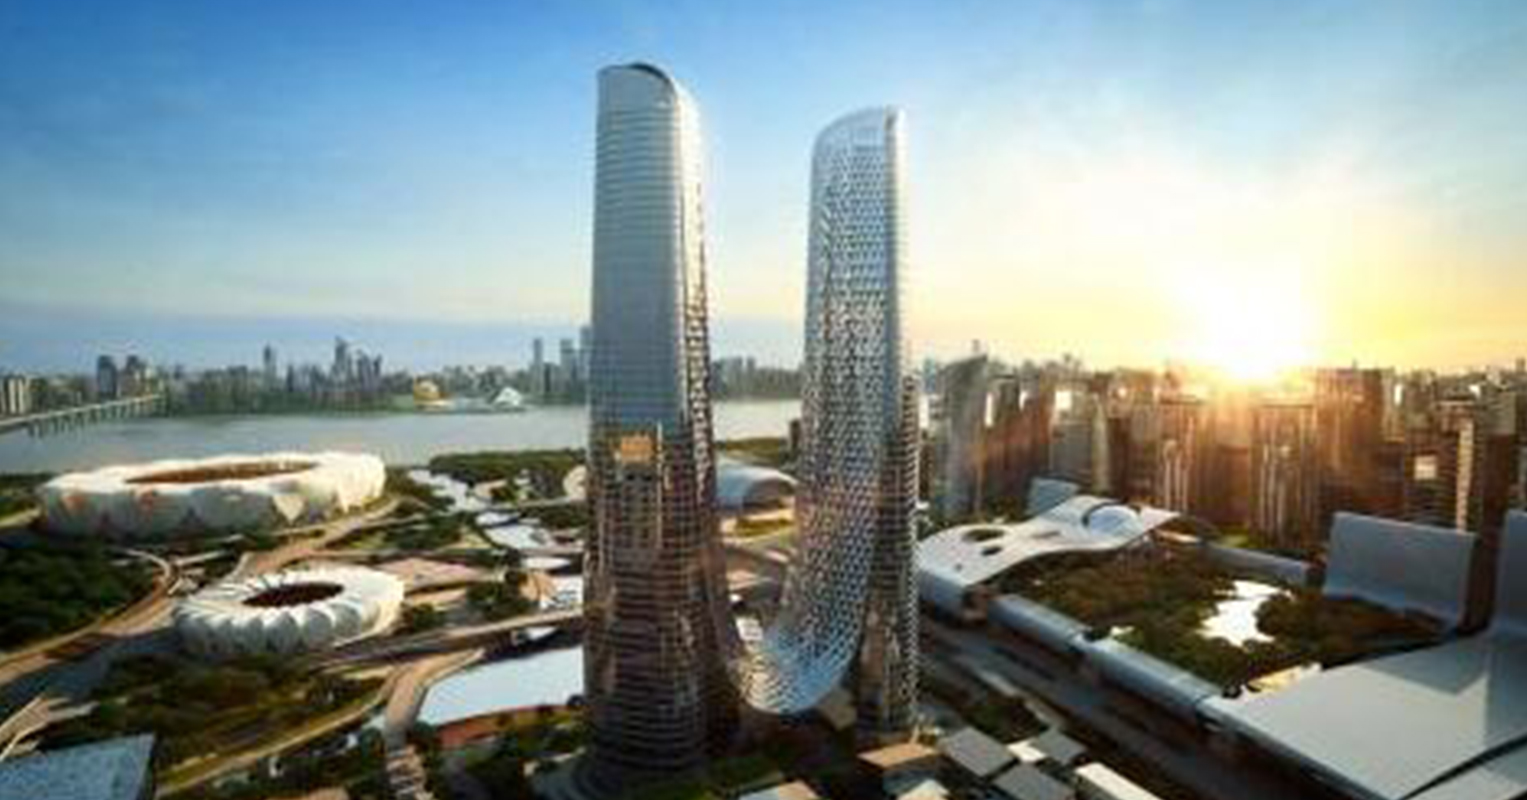 Supmea products are used in the tallest building in Hangzhou